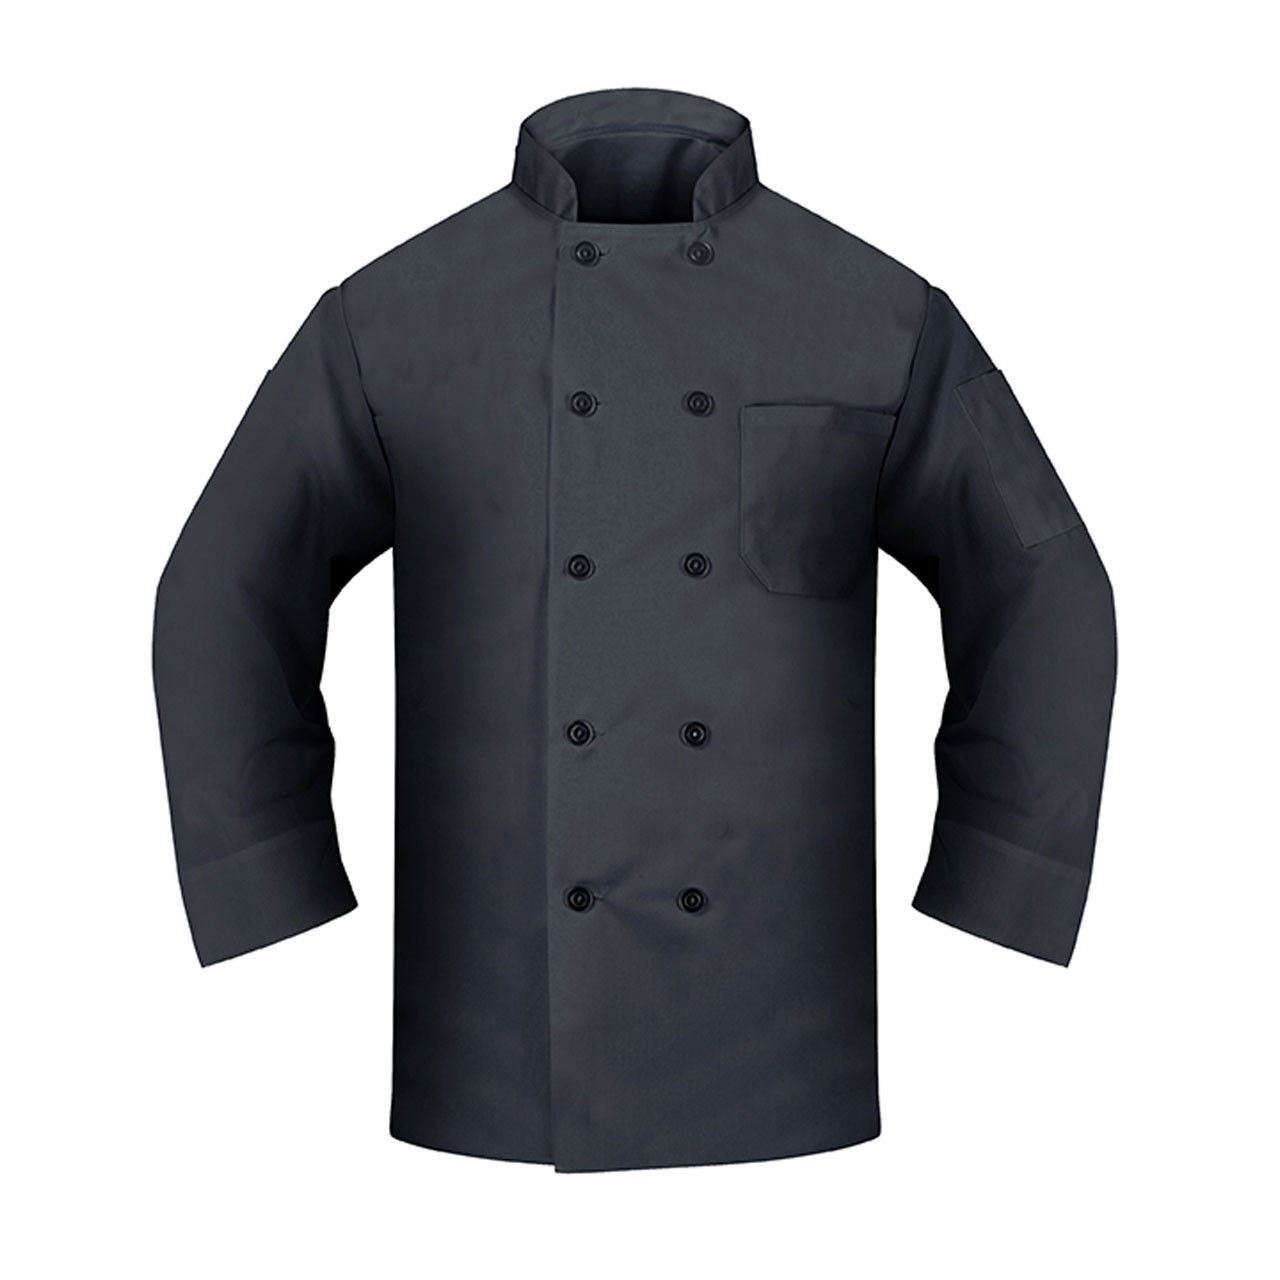 Black Chef Coat, Black Buttons, Twill Questions & Answers